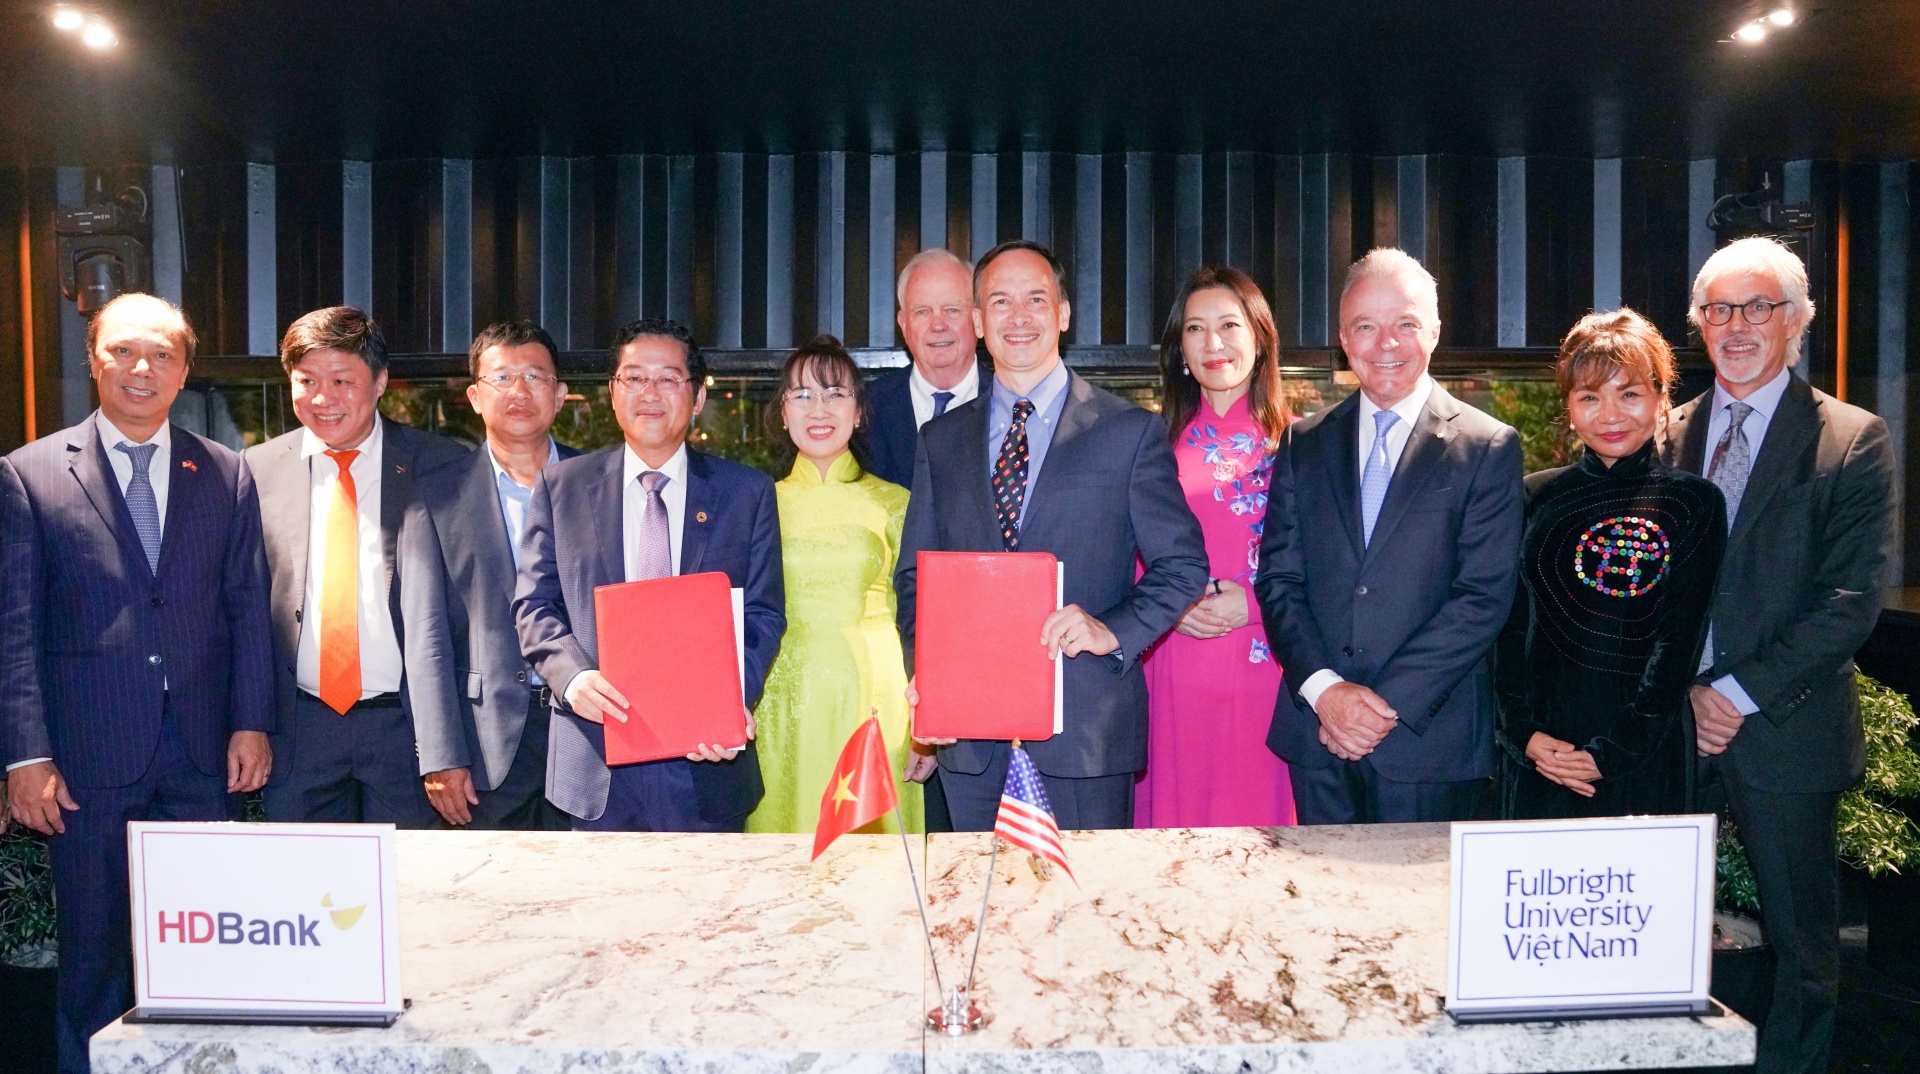 HDBank signs agreement with Fulbright University Vietnam